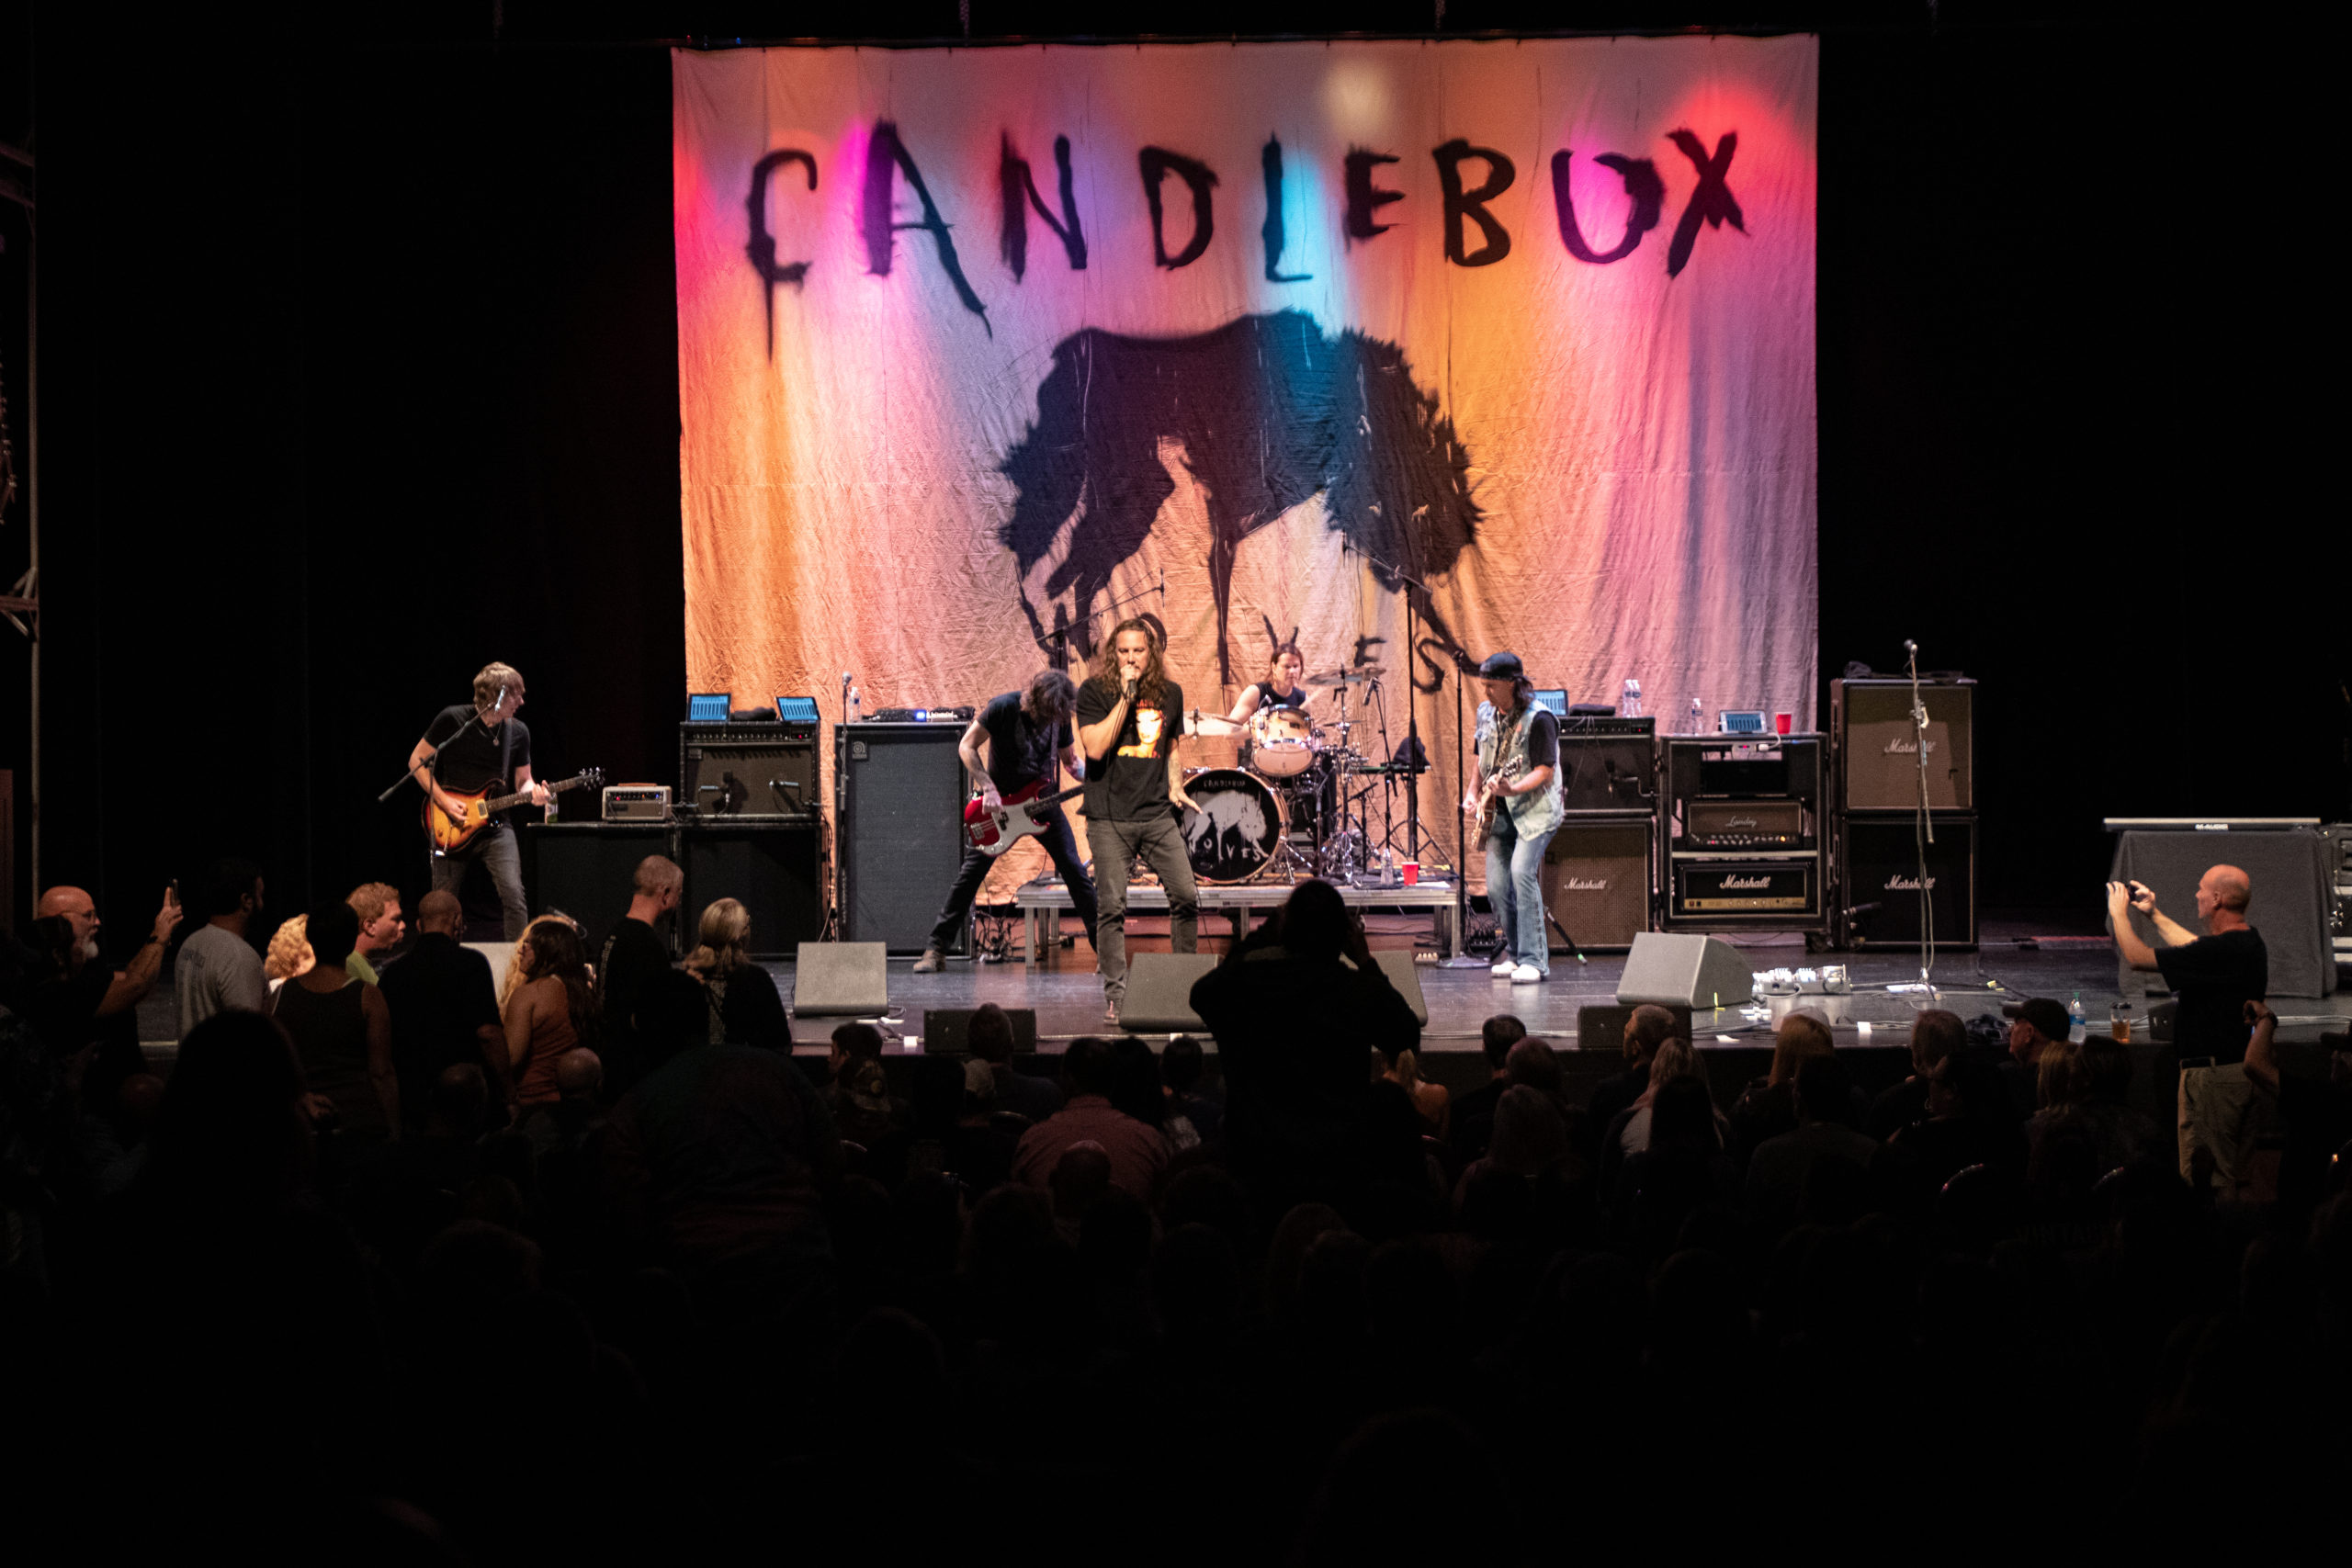 CANDLEBOX RETURNS TO THE STAGE IN HARRISBURG TO PROMOTE NEW ALBUM, WOLVES